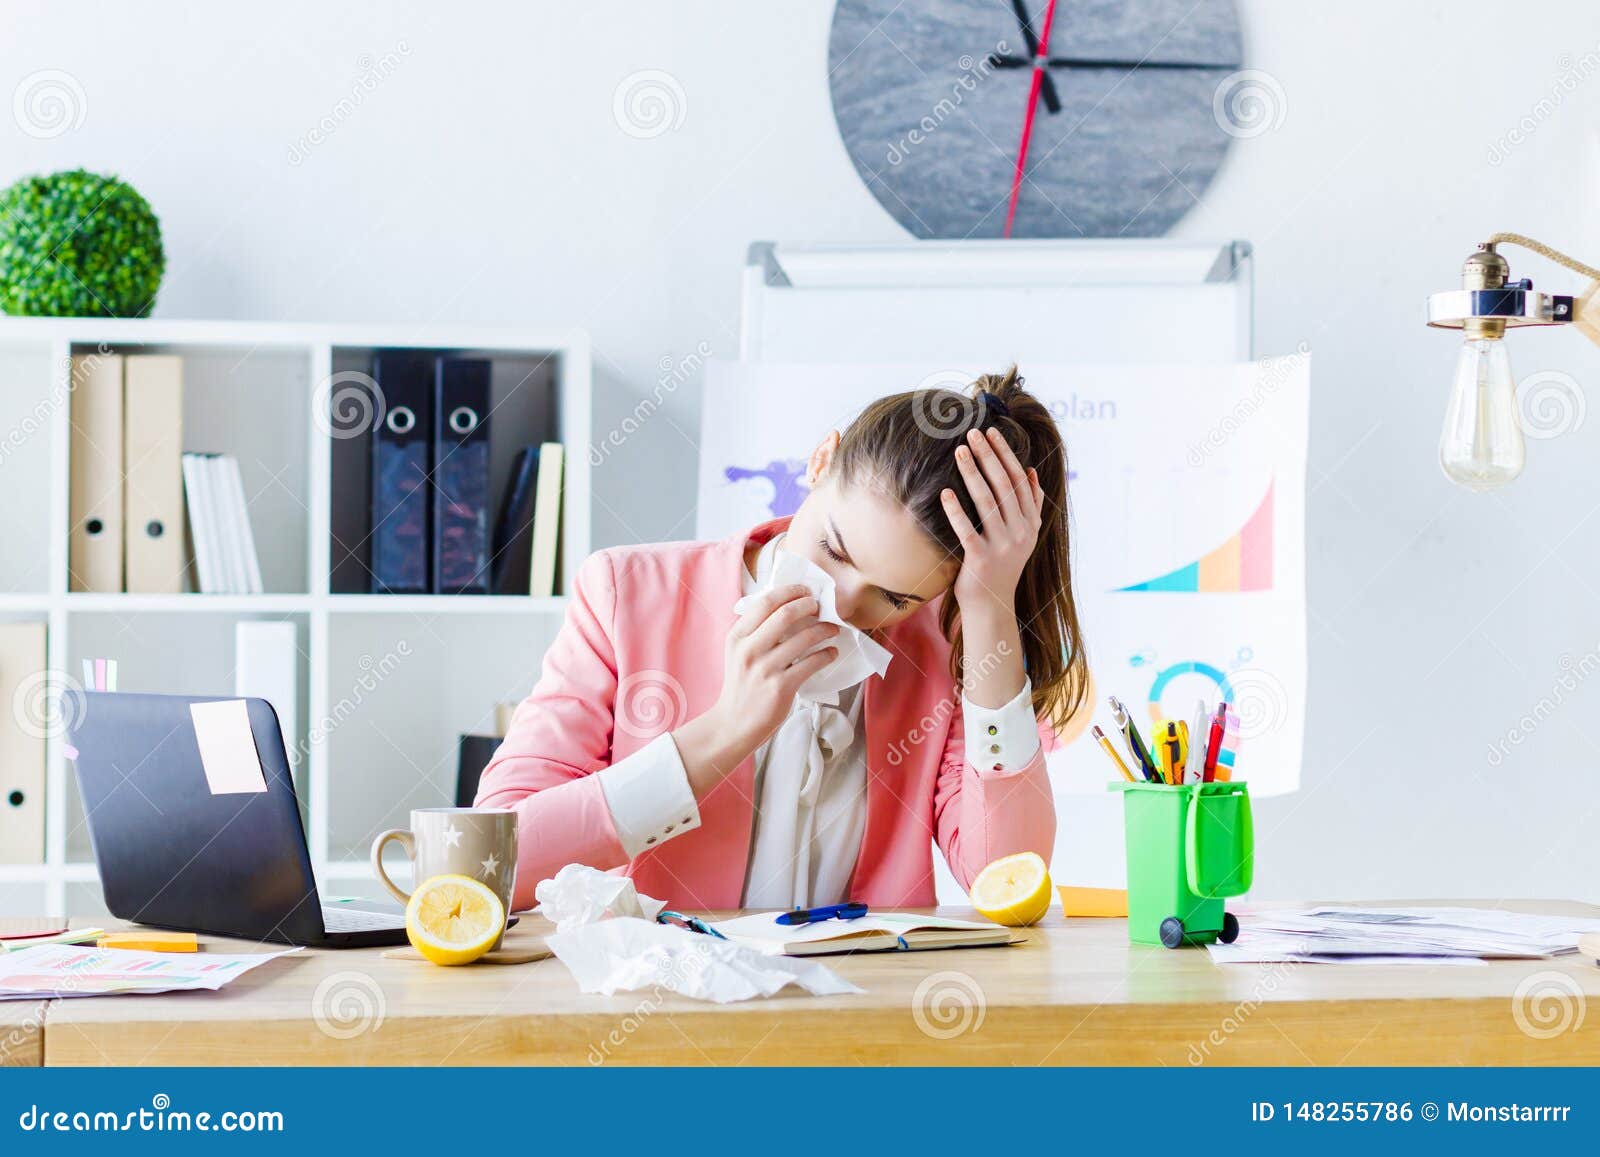 business woman feeling sick and tired at office